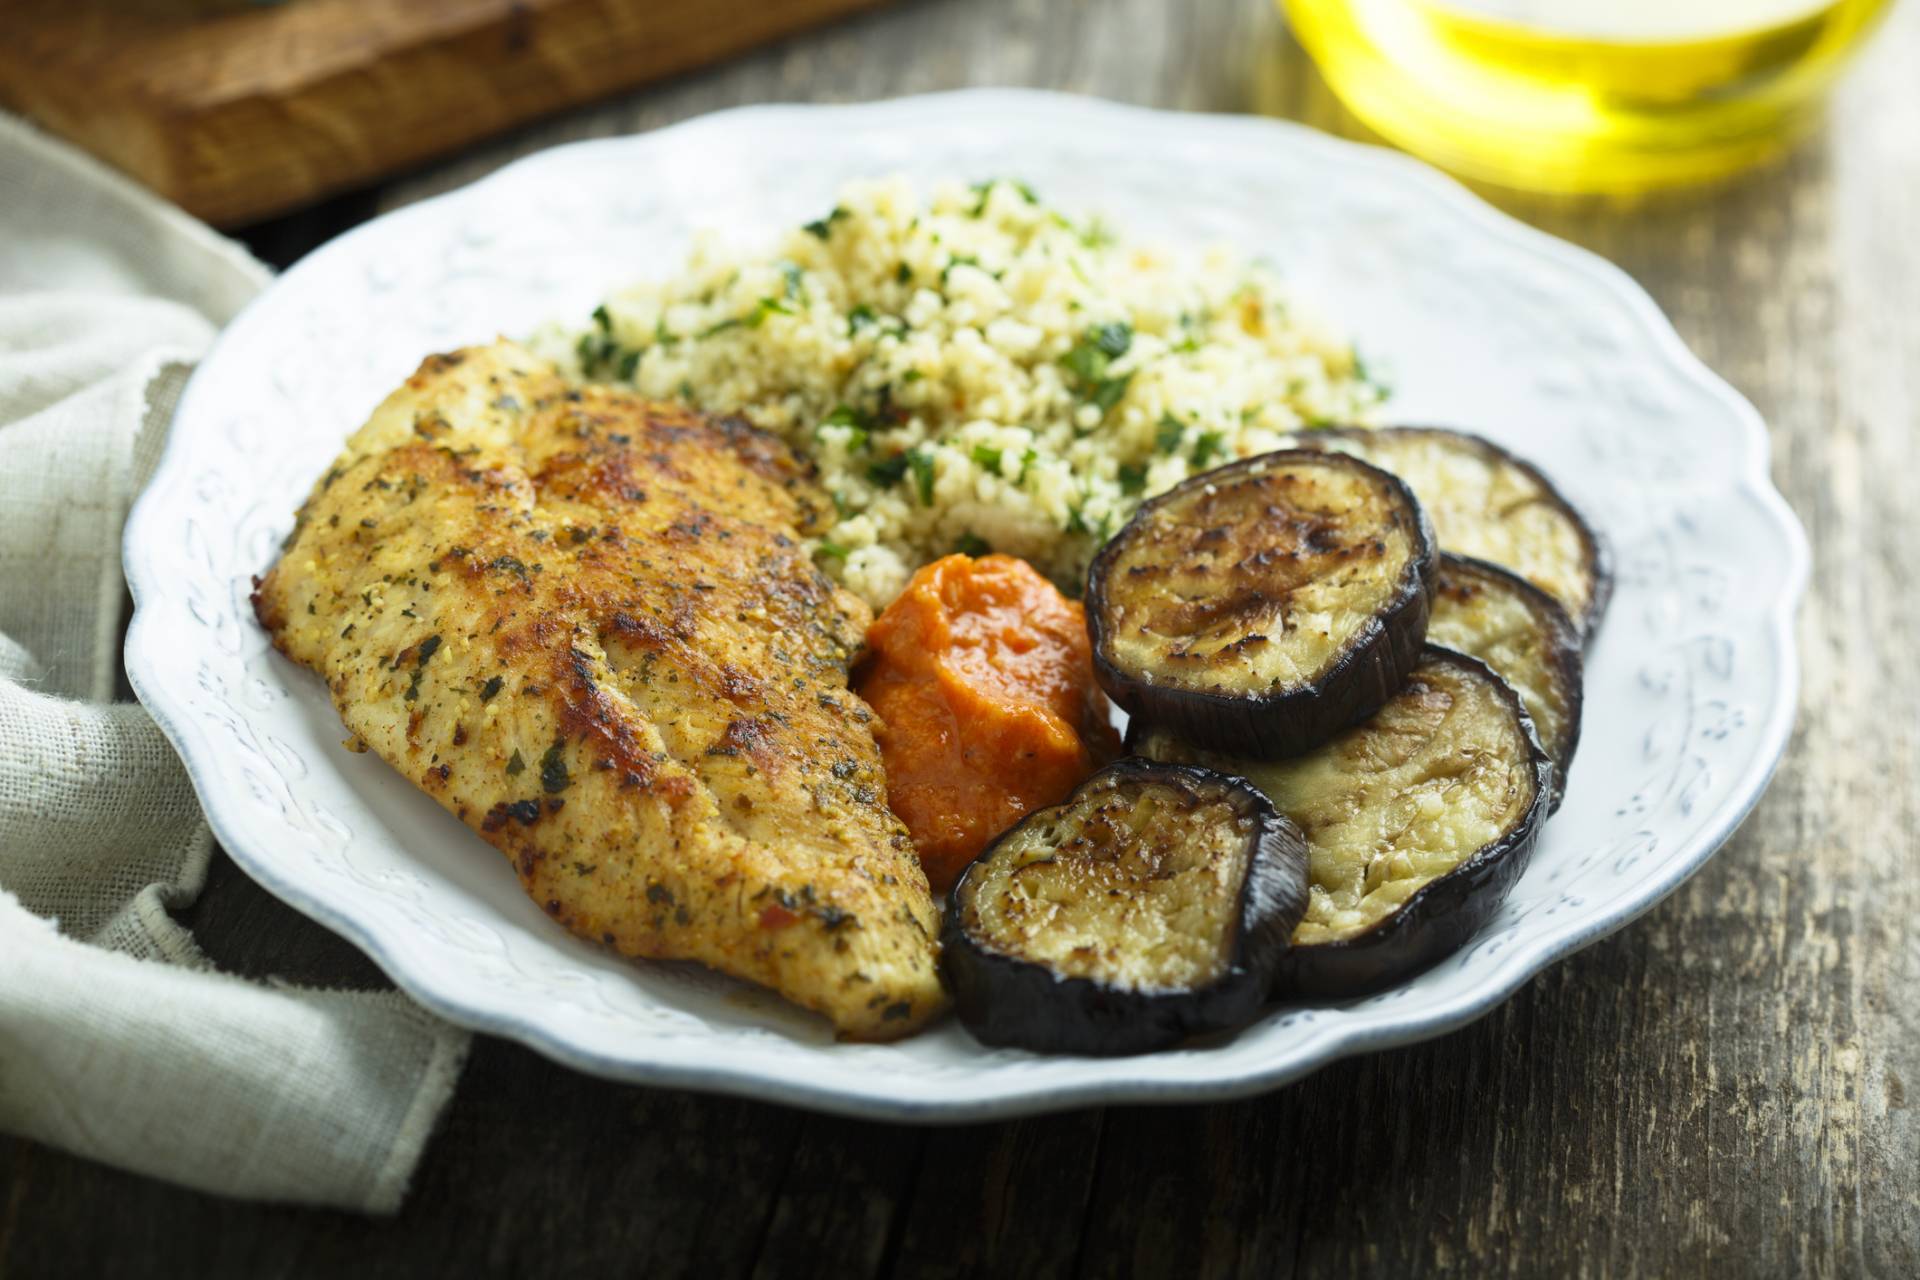 Parmesan Chicken with Grilled Eggplant